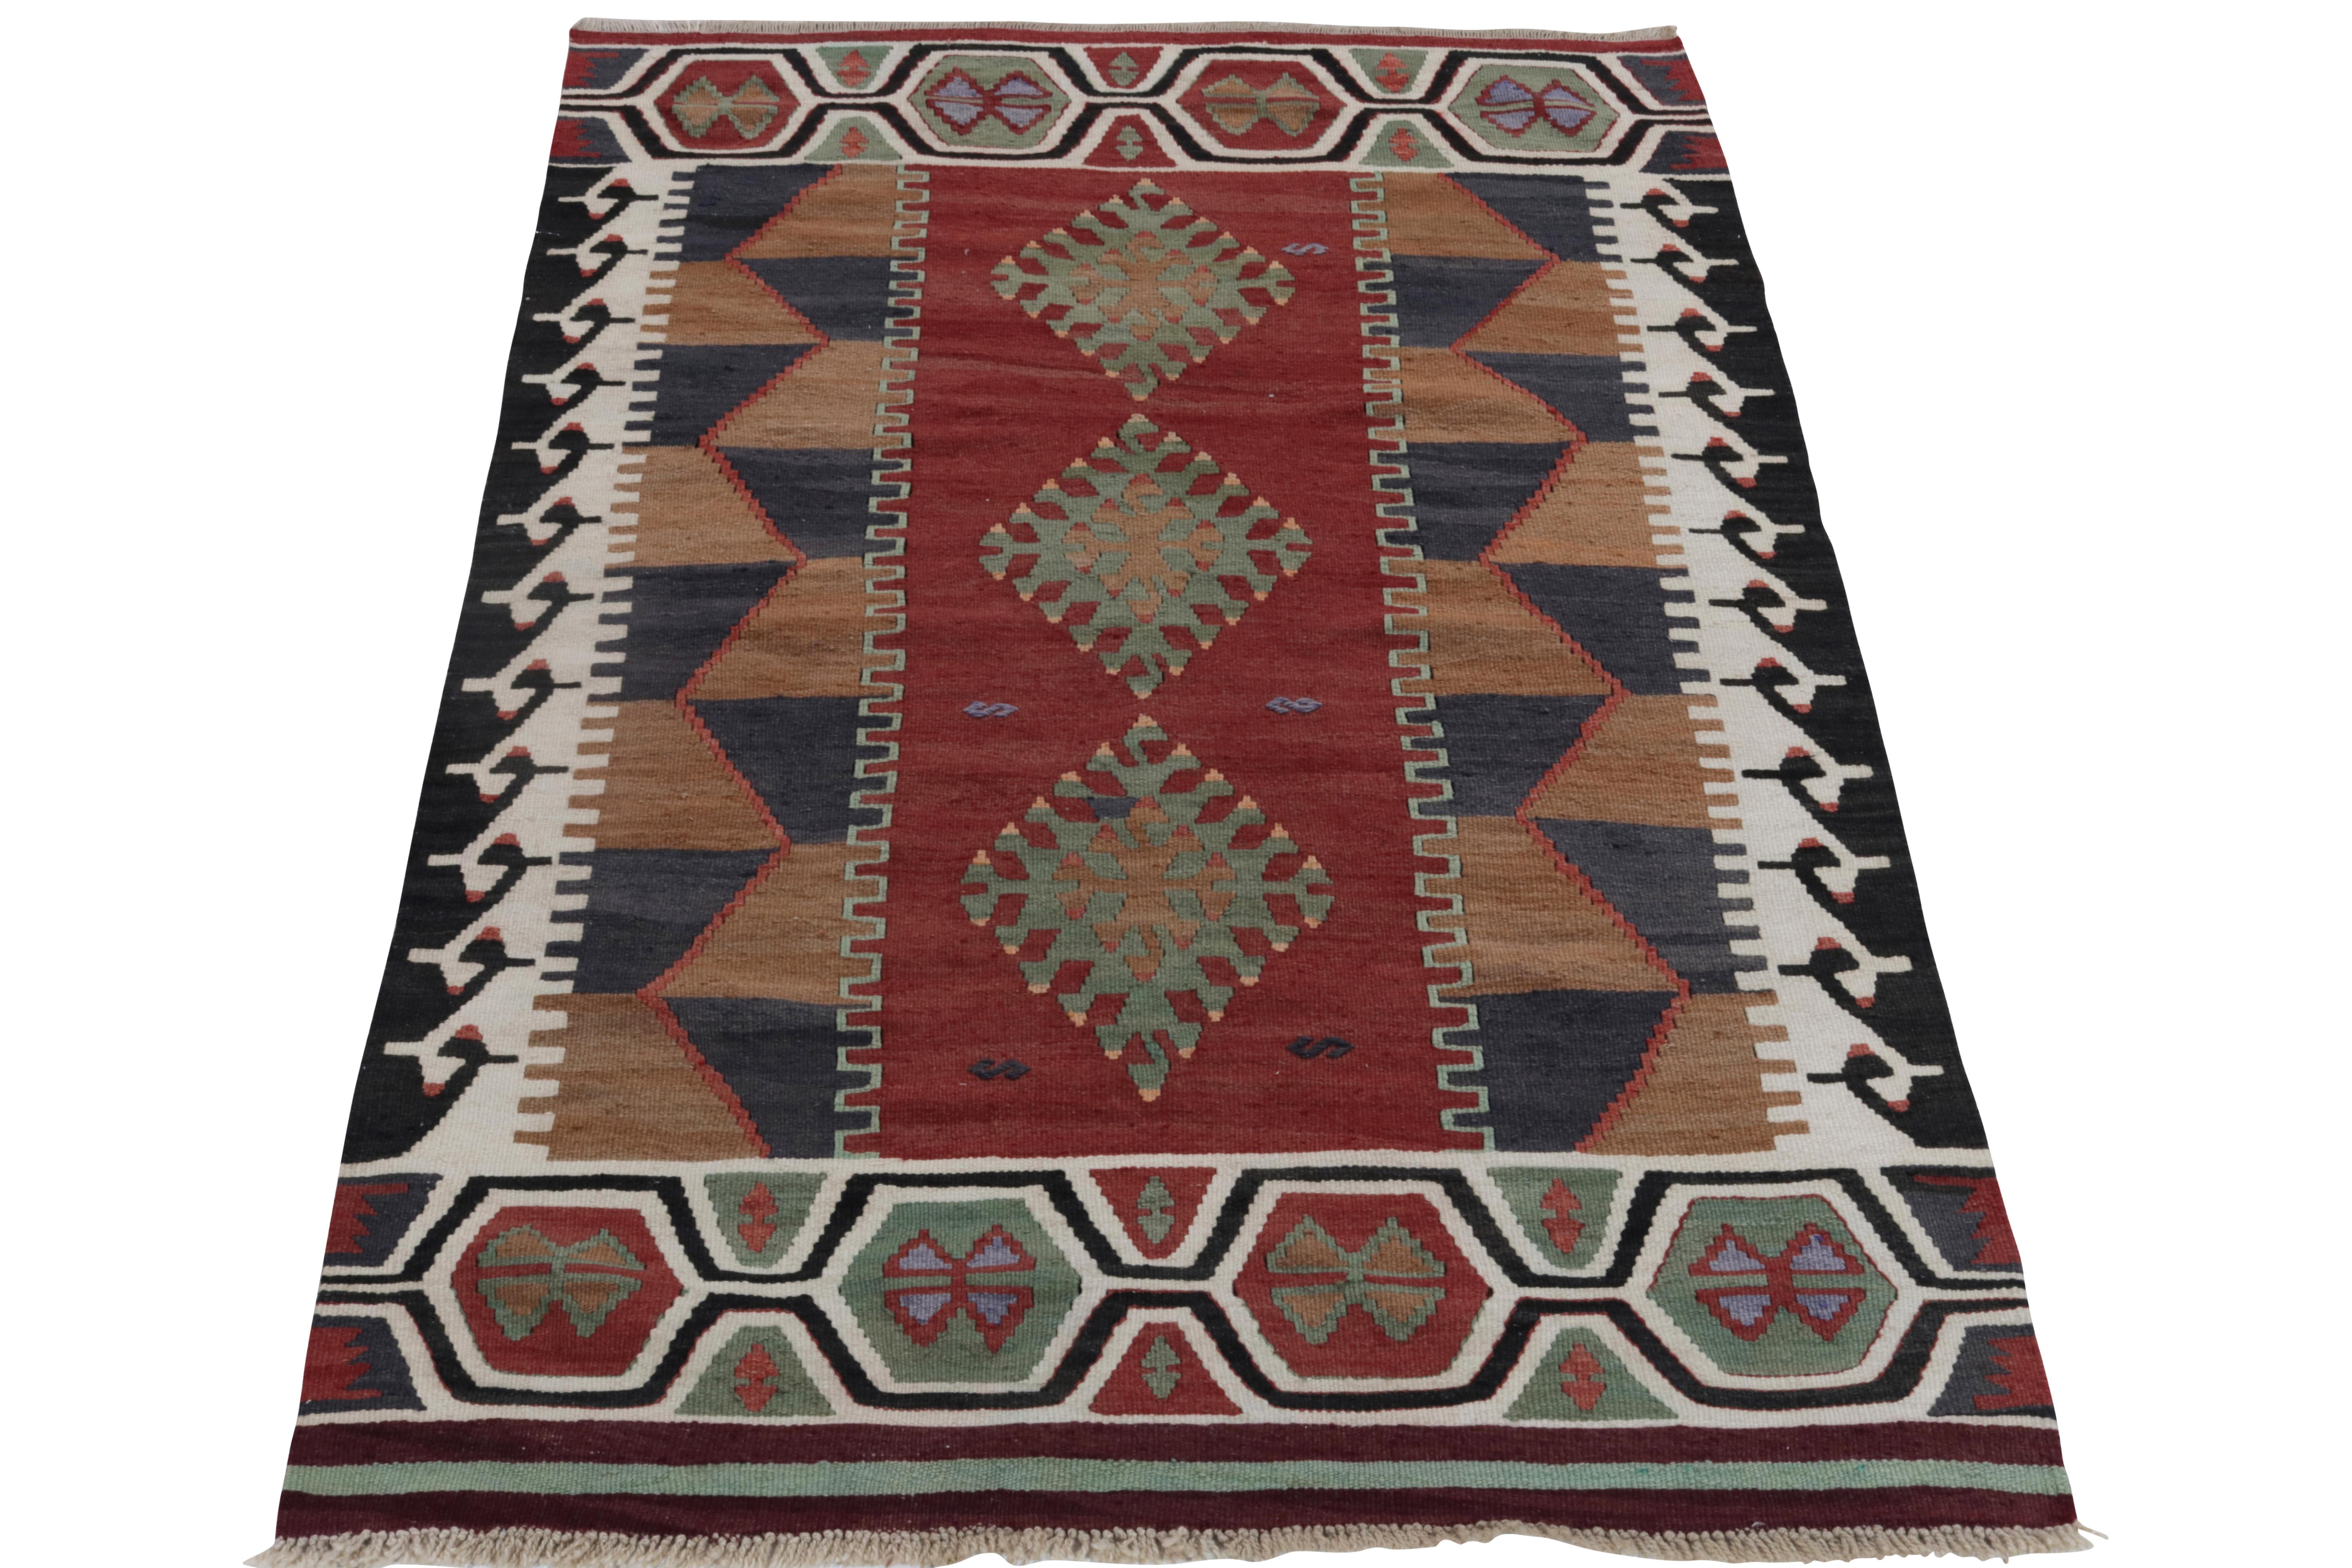 Handwoven in fine yarn, a 4x6 creation from our vintage Kilim & Flatweave selections. Originating from Persia around the 1950s, the mid-century rug enjoys a well defined geometric pattern emanating mid century sensibilities in an interesting color